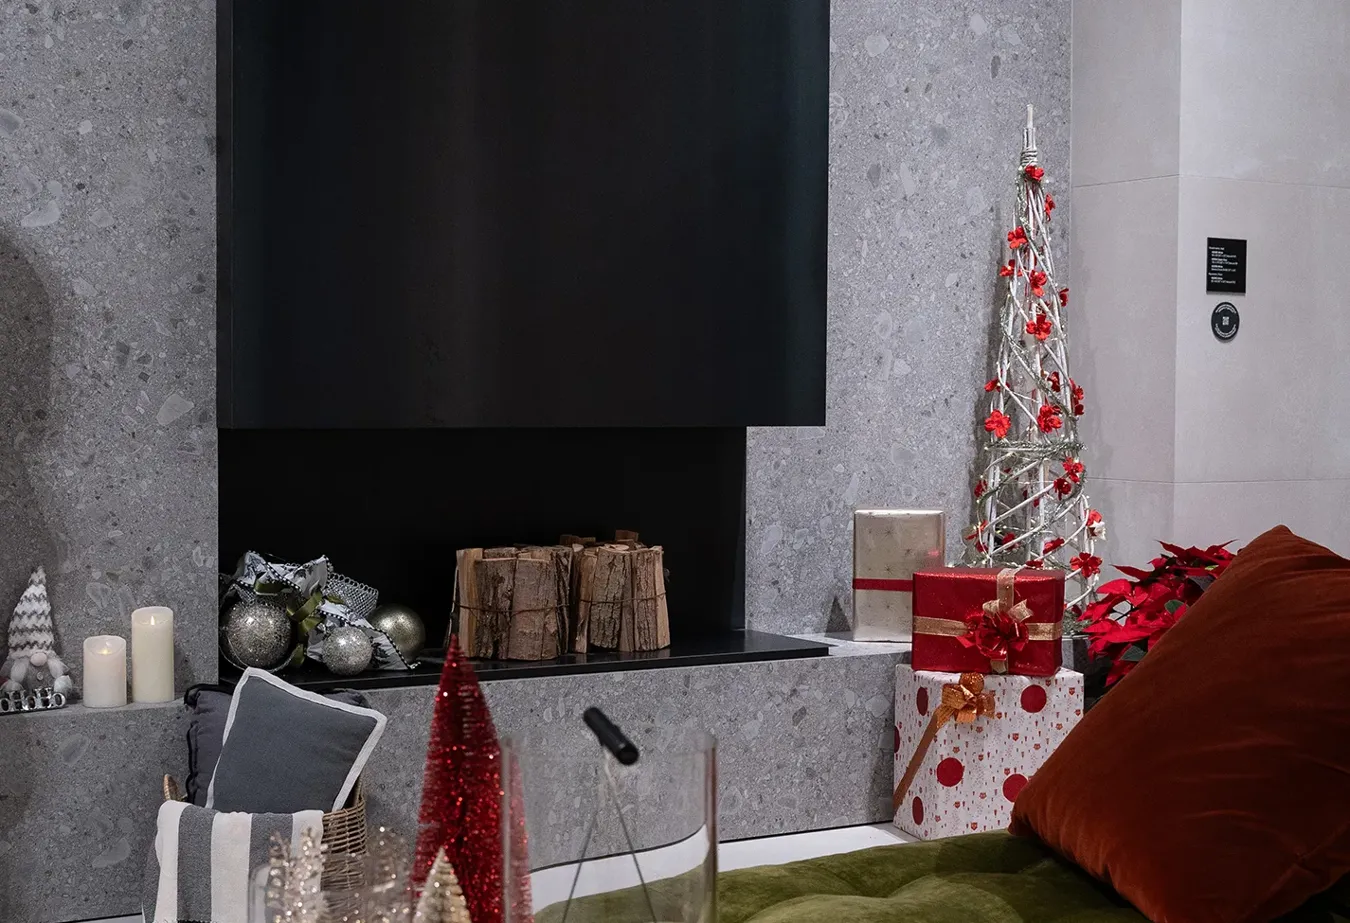 Festive living room with fireplace, Noord white tiles, and Christmas decorations in red and silver.